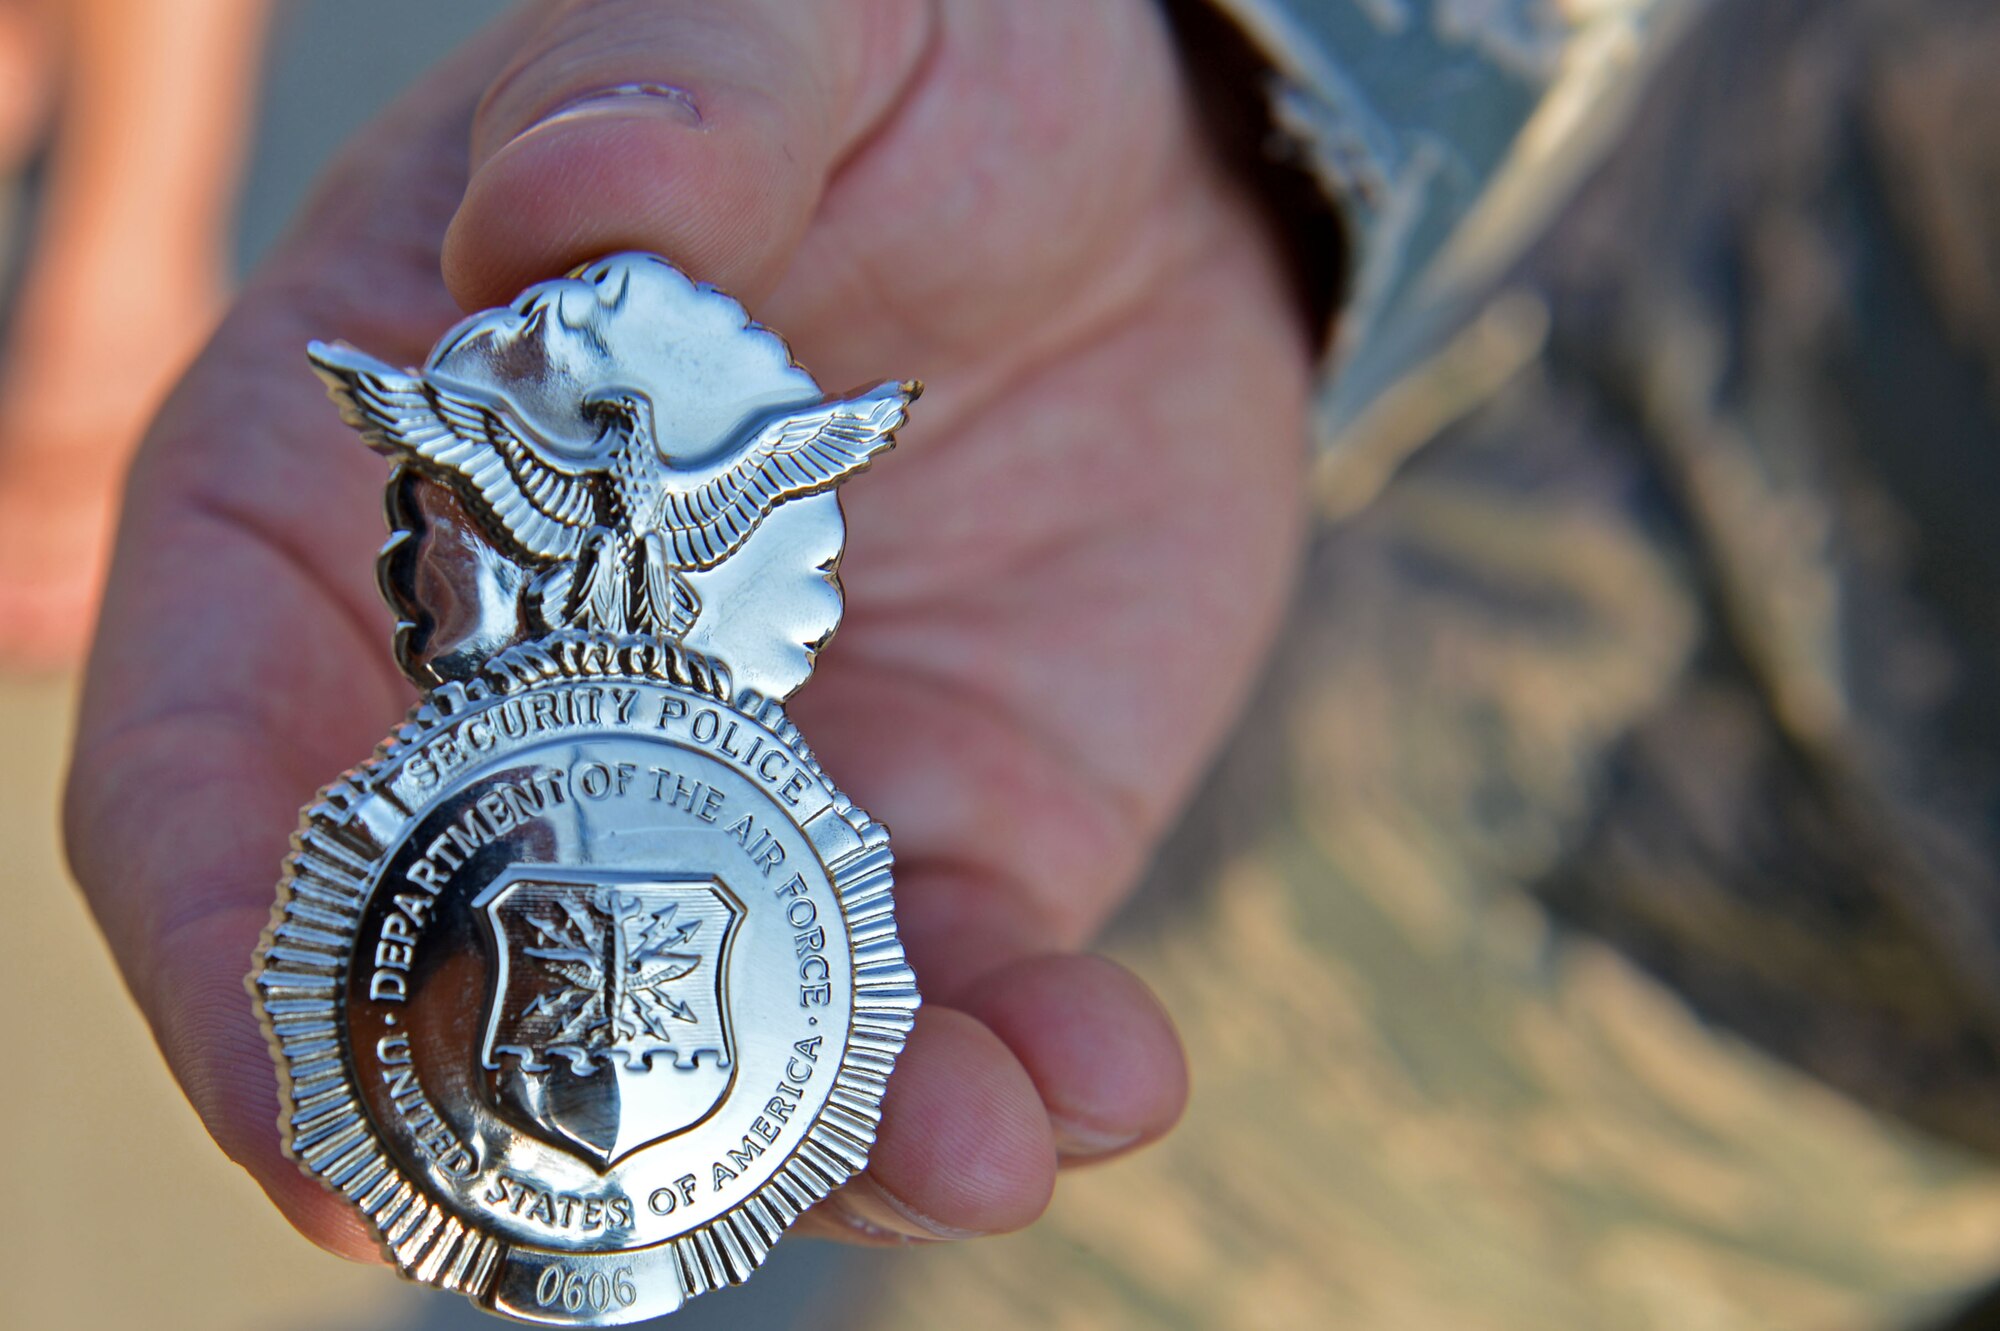 U.S. Air Force Tech. Sgt. Kevin Arndt, 20th Security Forces Squadron anti-terrorism program noncommissioned officer in charge, holds Jake Pritchard’s 20th SFS honorary defender badge at Shaw Air Force Base, S.C., Sept. 9, 2016. Lt. Col. Garon Shelton, 20th SFS commander, assigned Pritchard’s badge number and retired it at the end of the event. (U.S. Air Force photo by Airman 1st Class Christopher Maldonado)